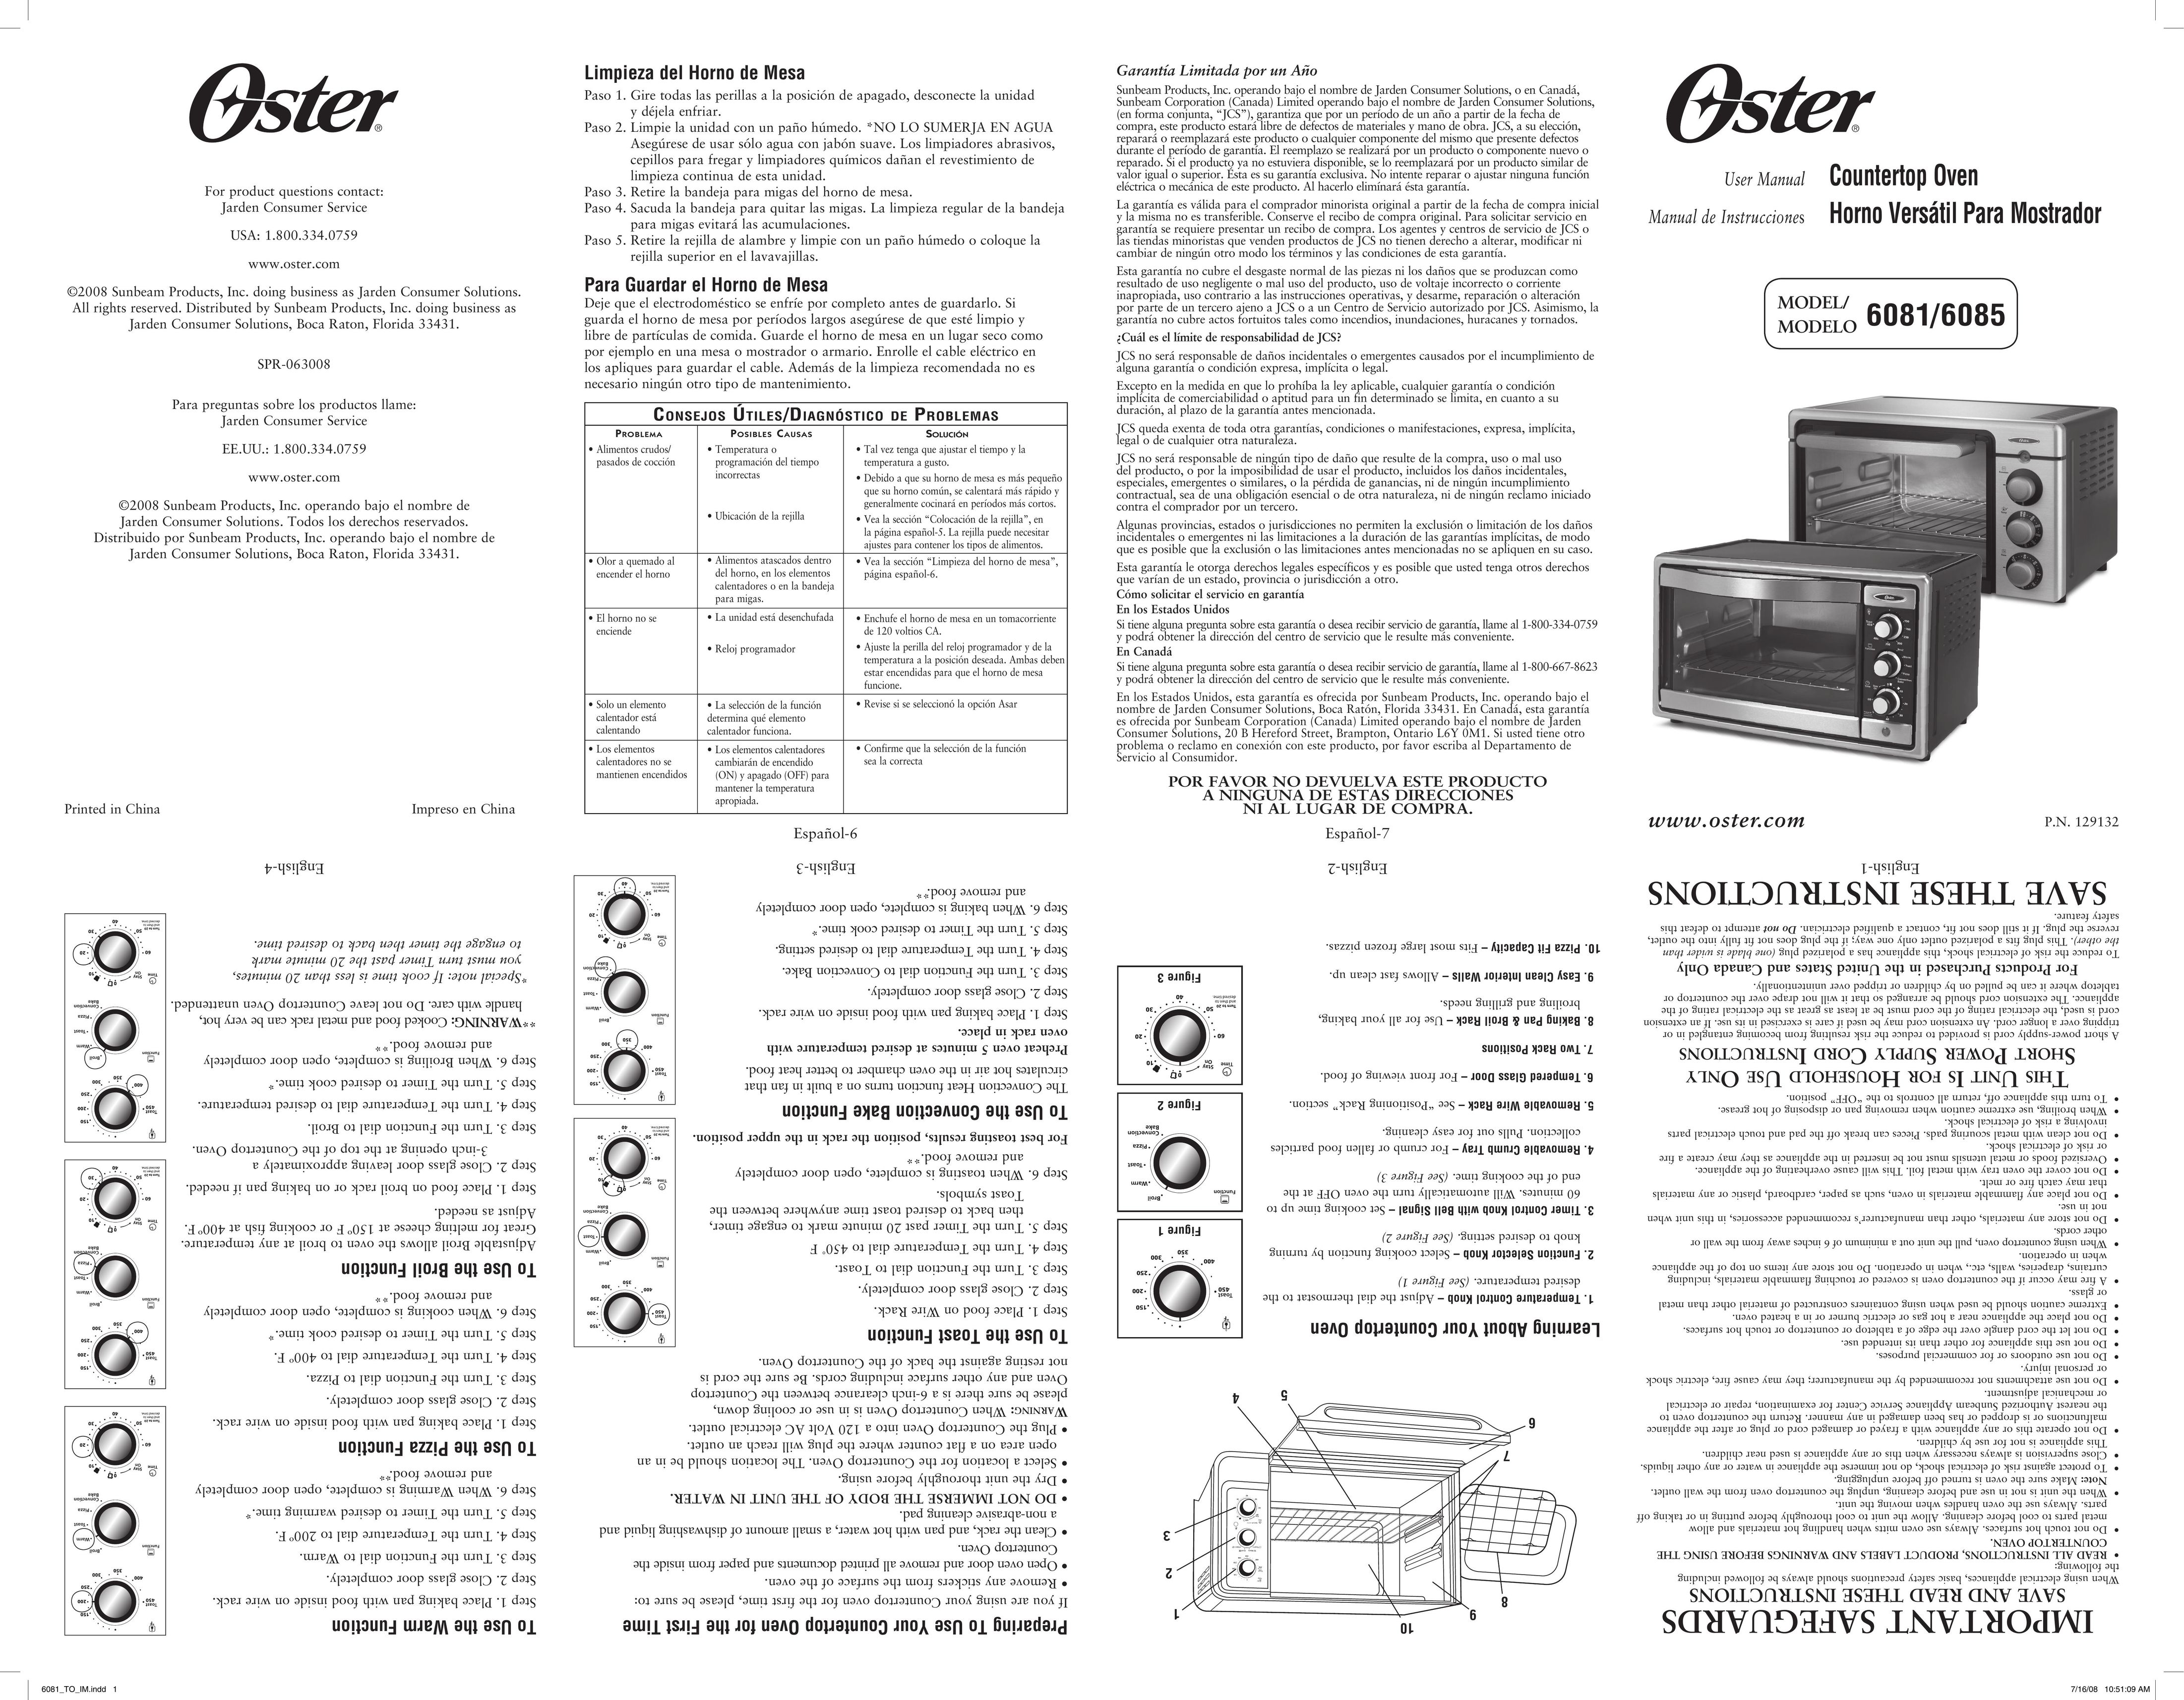 Oster 6085 Oven User Manual